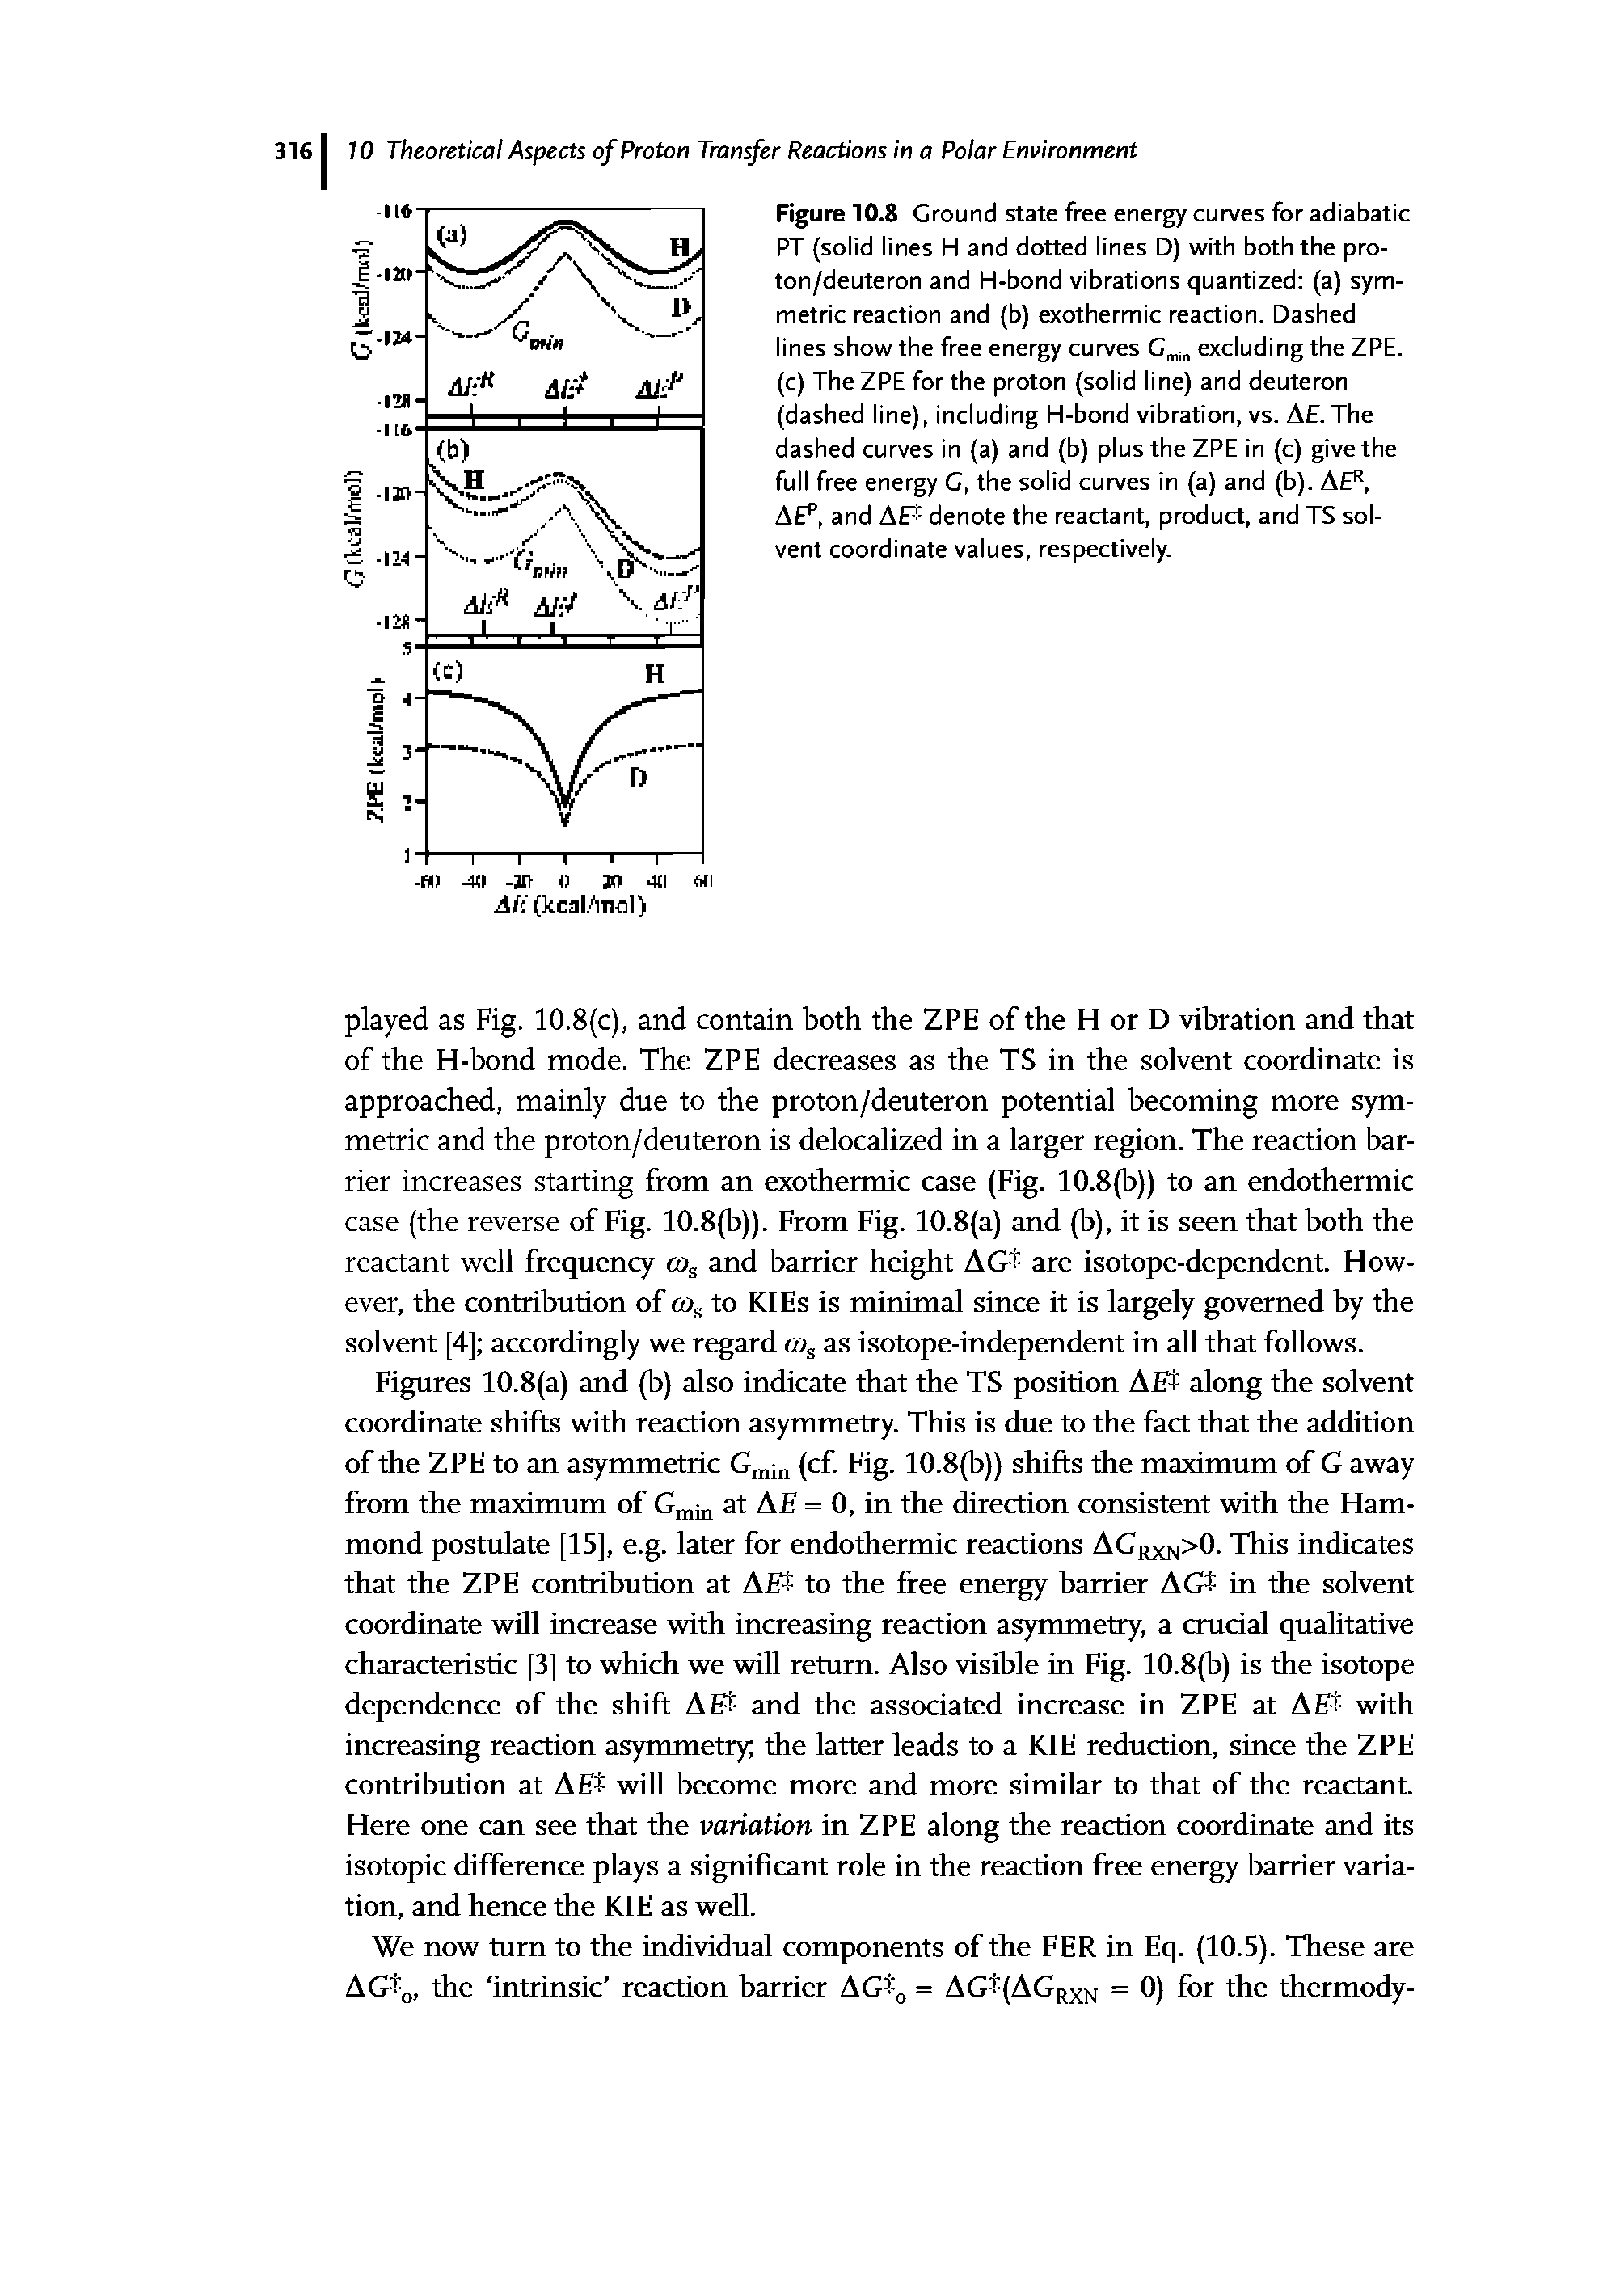 Figures 10.8(a) and (b) also indicate that the TS position A along the solvent coordinate shifts with reaction asymmetry. This is due to the fact that the addition of the ZPE to an asymmetric (cf. Fig. 10.8(b)) shifts the maximum of G away from the maximum of at AE = 0, in the direction consistent with the Hammond postulate [15], e.g. later for endothermic reactions AGrxn>0- This indicates that the ZPE contribution at A to the free energy barrier AGl in the solvent coordinate will increase with increasing reaction asymmetry, a crucial qualitative characteristic [3] to which we will return. Also visible in Fig. 10.8(b) is the isotope dependence of the shift AEi- and the associated increase in ZPE at AEi- with increasing reaction asymmetry the latter leads to a KIE reduction, since the ZPE contribution at A will become more and more similar to that of the reactant. Here one can see that the variation in ZPE along the reaction coordinate and its isotopic difference plays a significant role in the reaction free energy barrier variation, and hence the KIE as well.